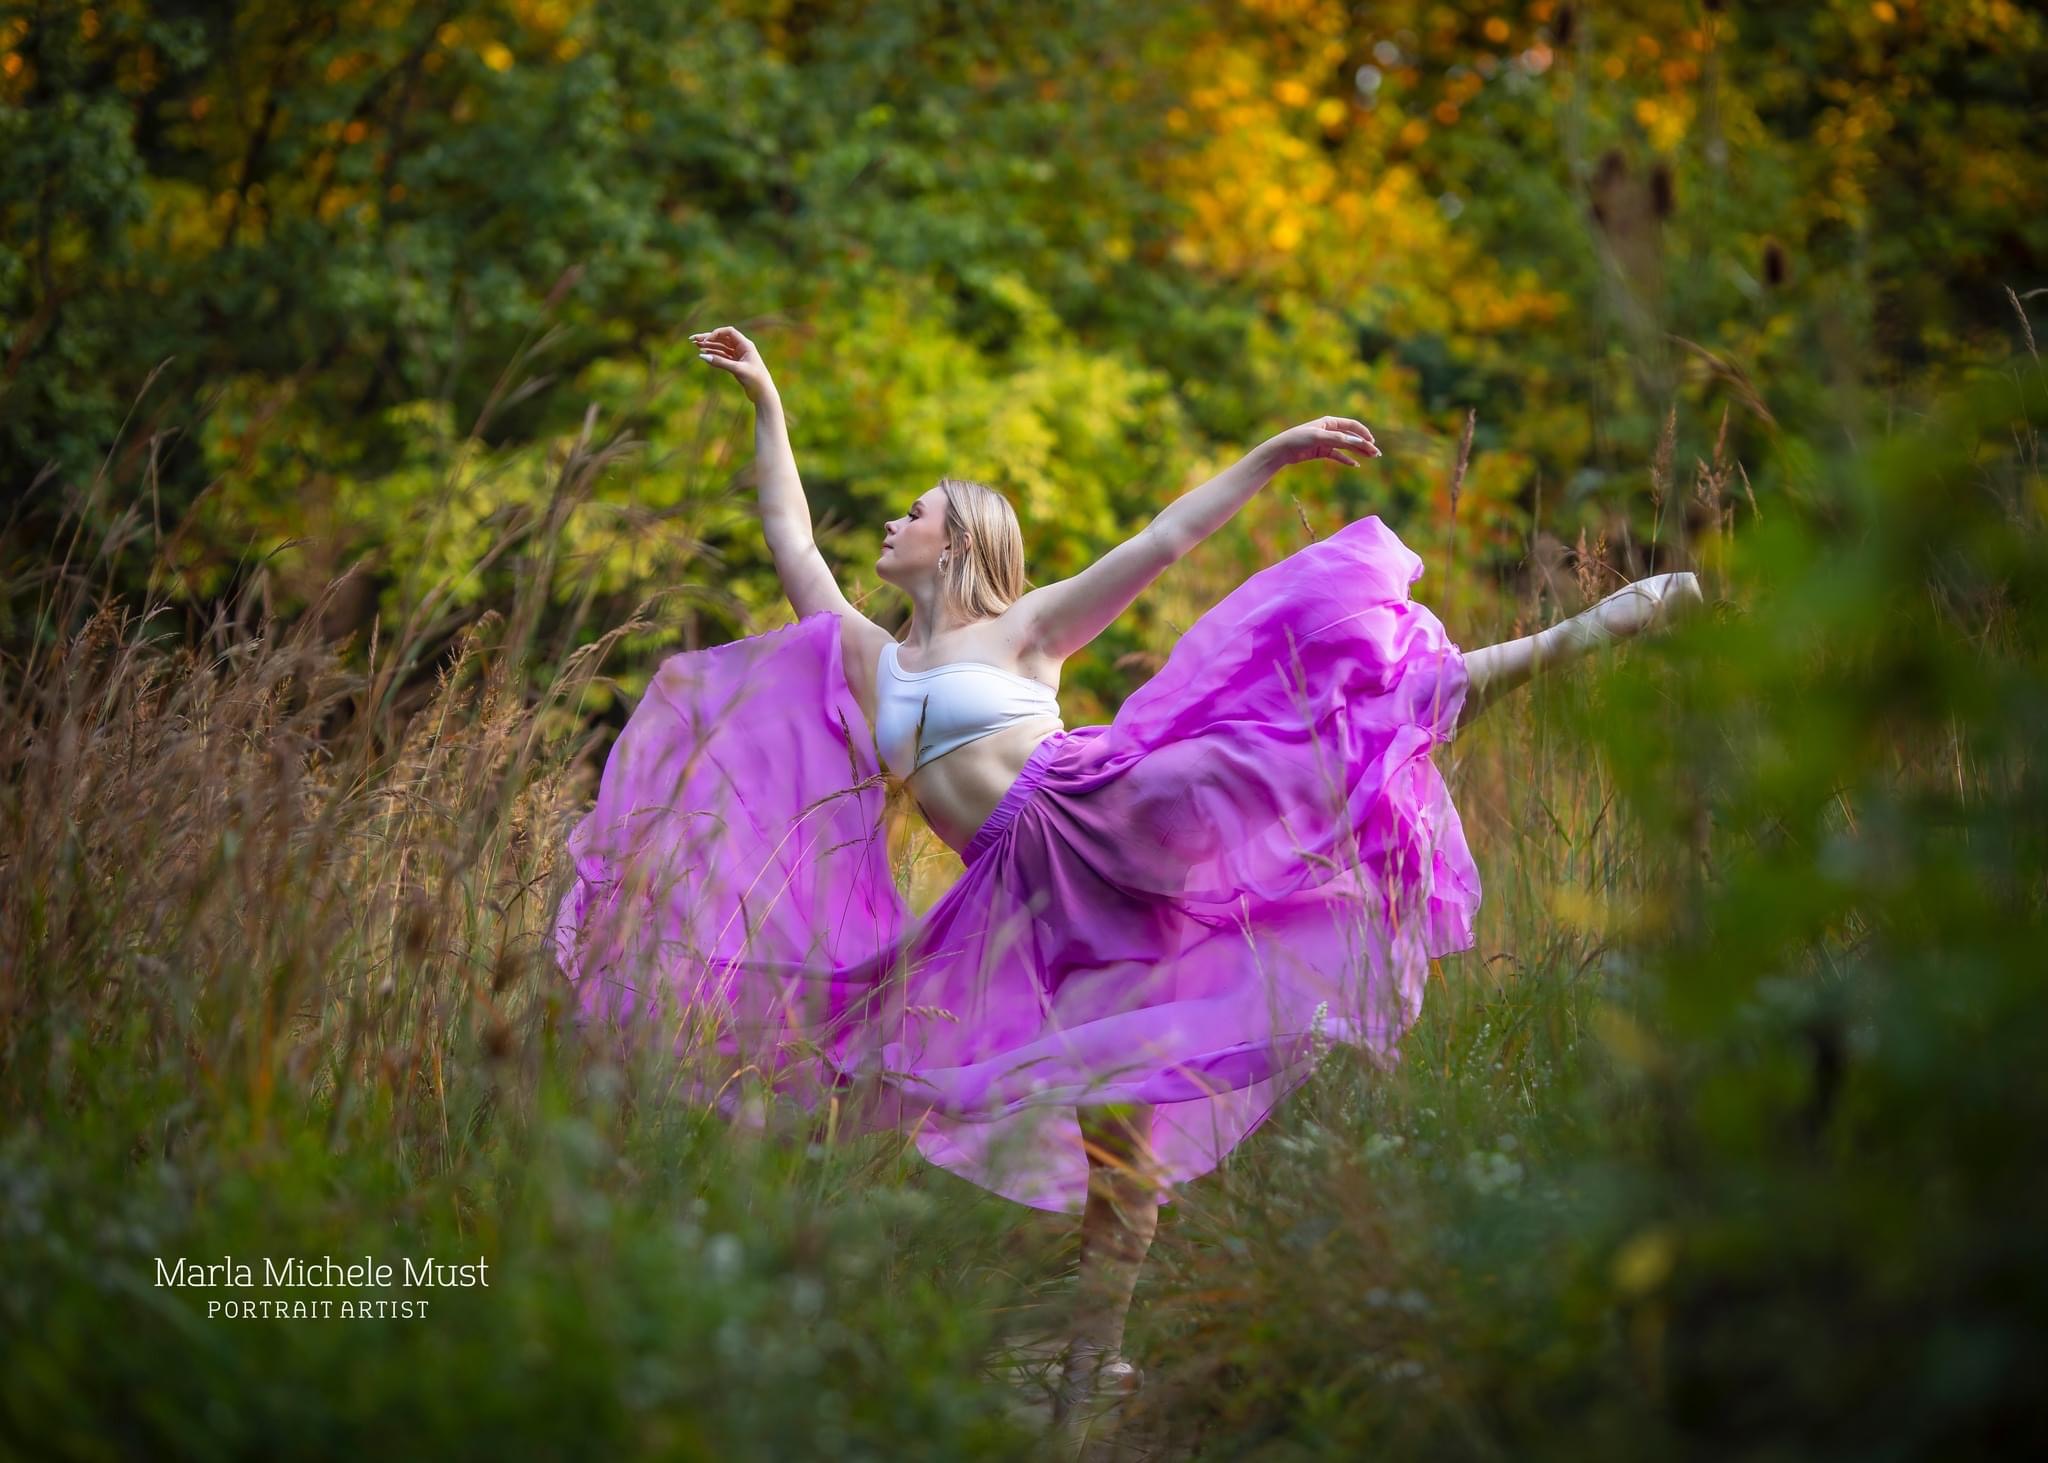 Dancer with flowy dress in a Detroit flowering field during a dance photoshoot